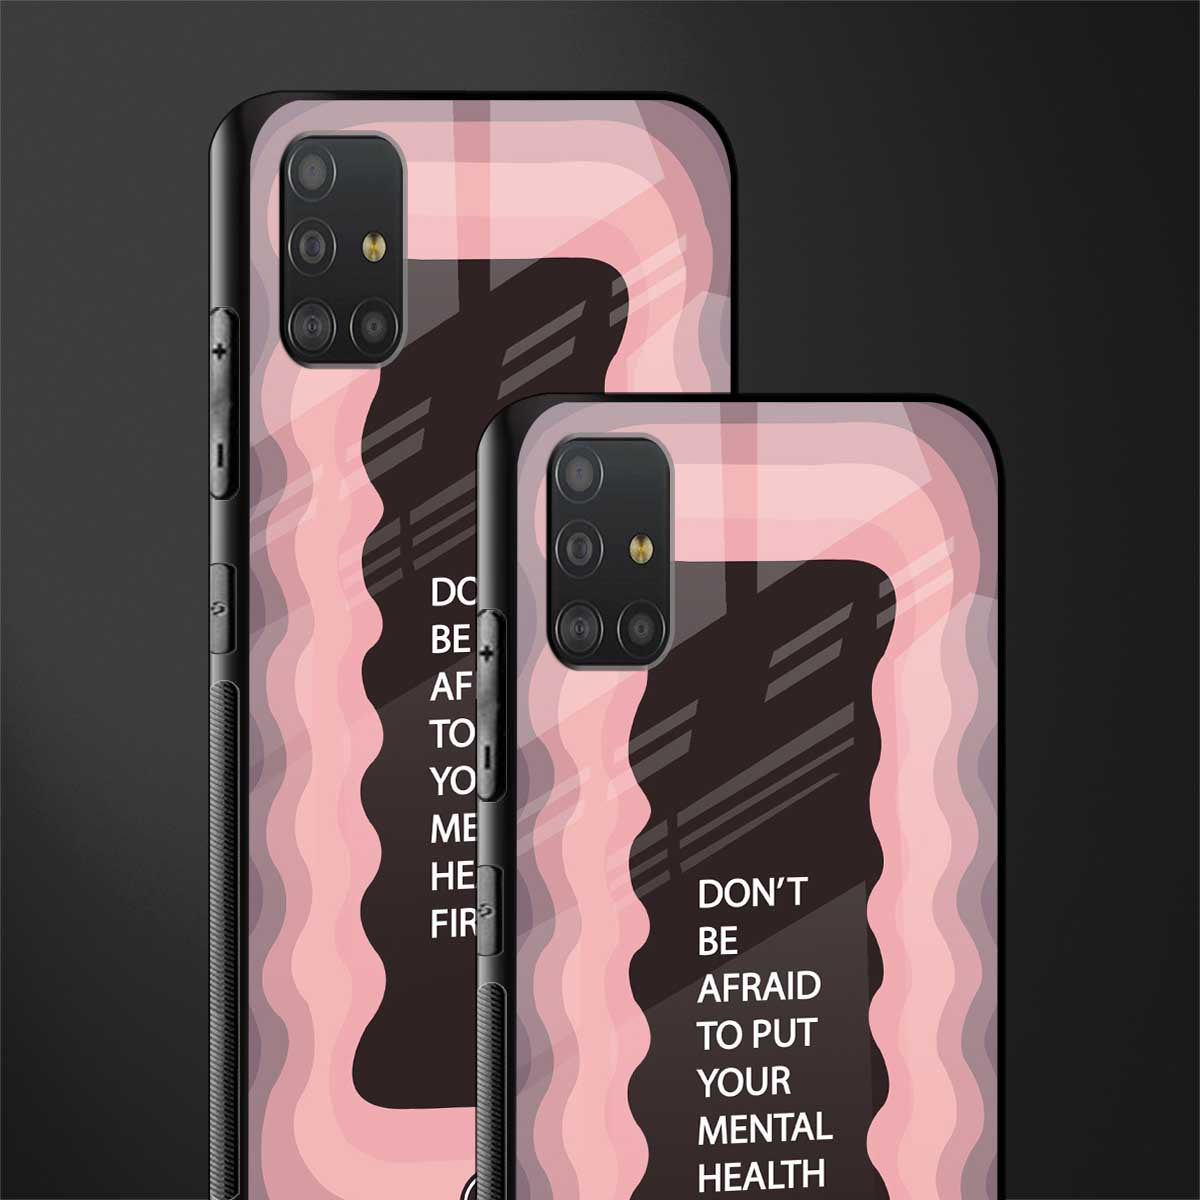 mental health first glass case for samsung galaxy a51